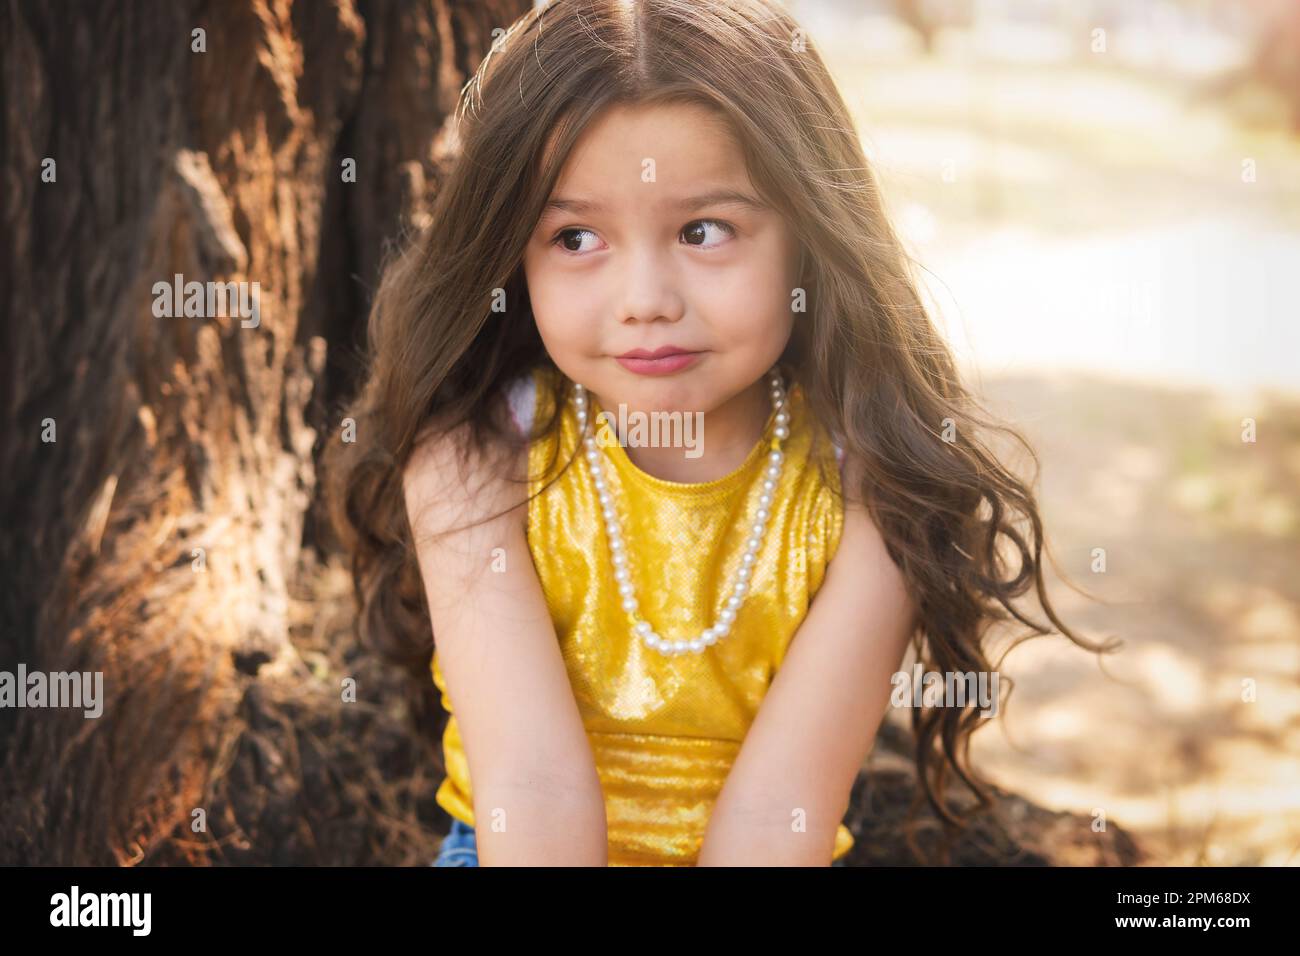 Doubtful expression of a little girl, beautiful blonde girl, children's day theme. Stock Photo